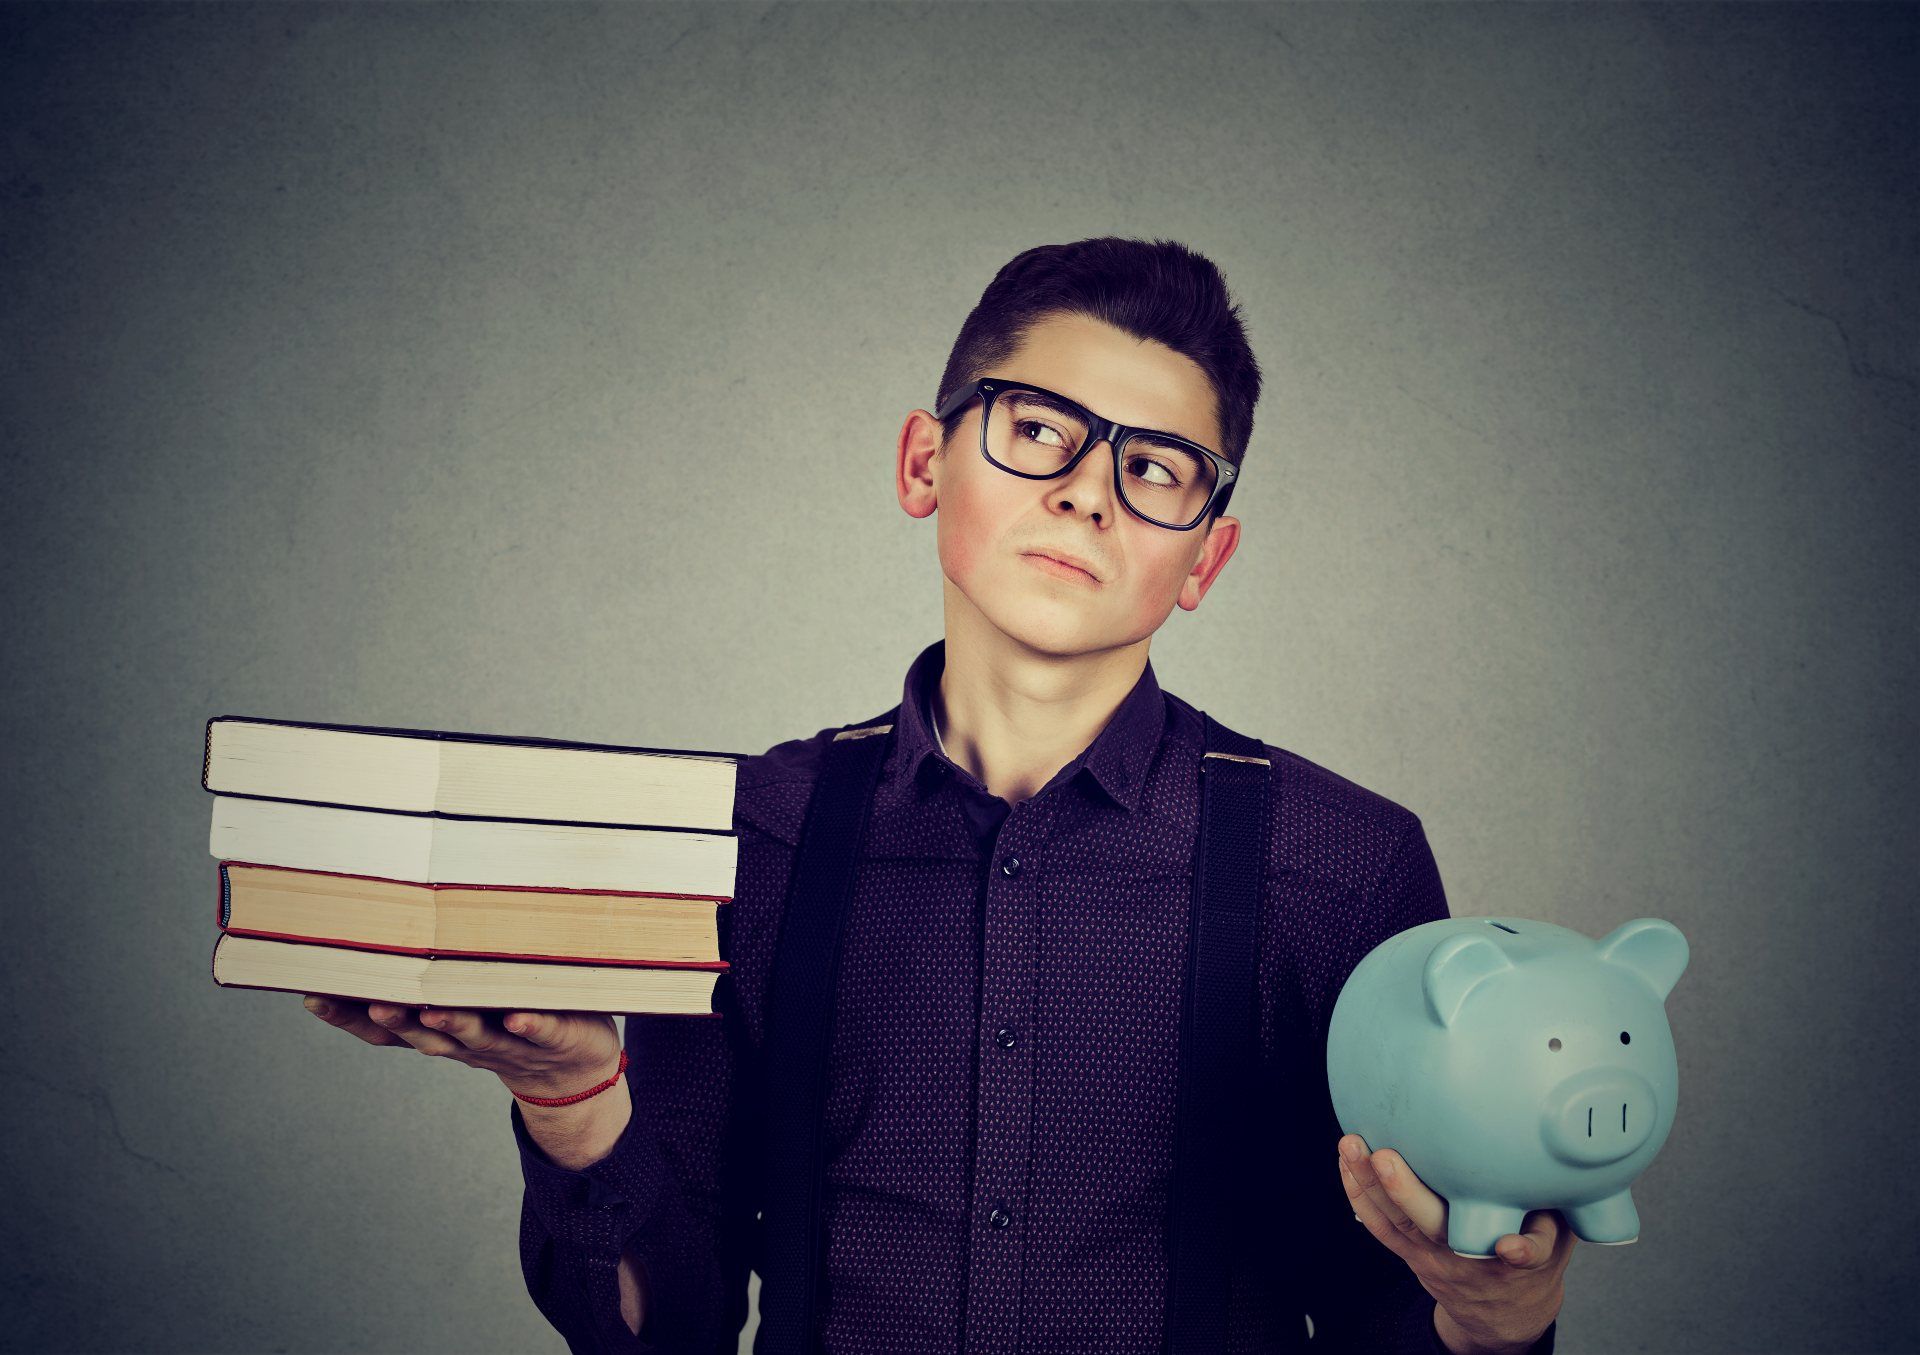 A young man wearing glasses and a backpack holds a stack of four books in his right hand and a blue piggy bank in his left hand - pheaa